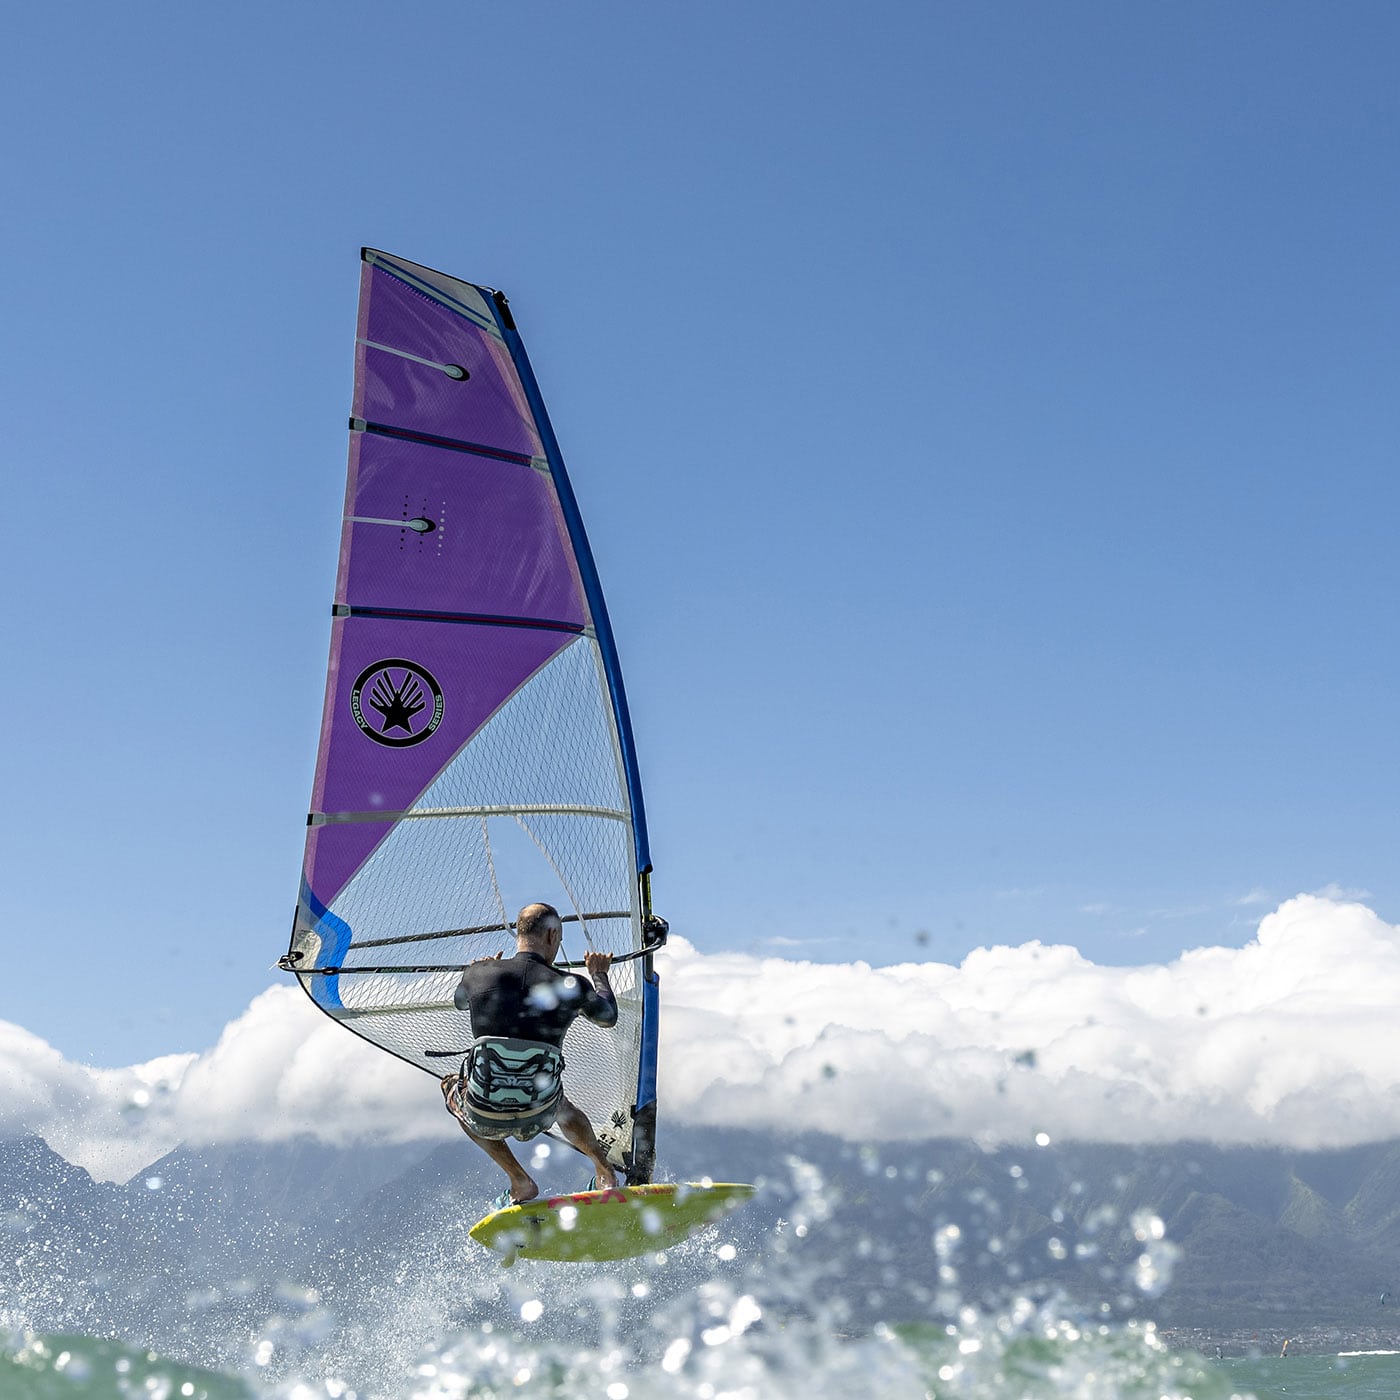 Ezzy Sails - LEGACY - Worthing Watersports - - Ezzy Sails